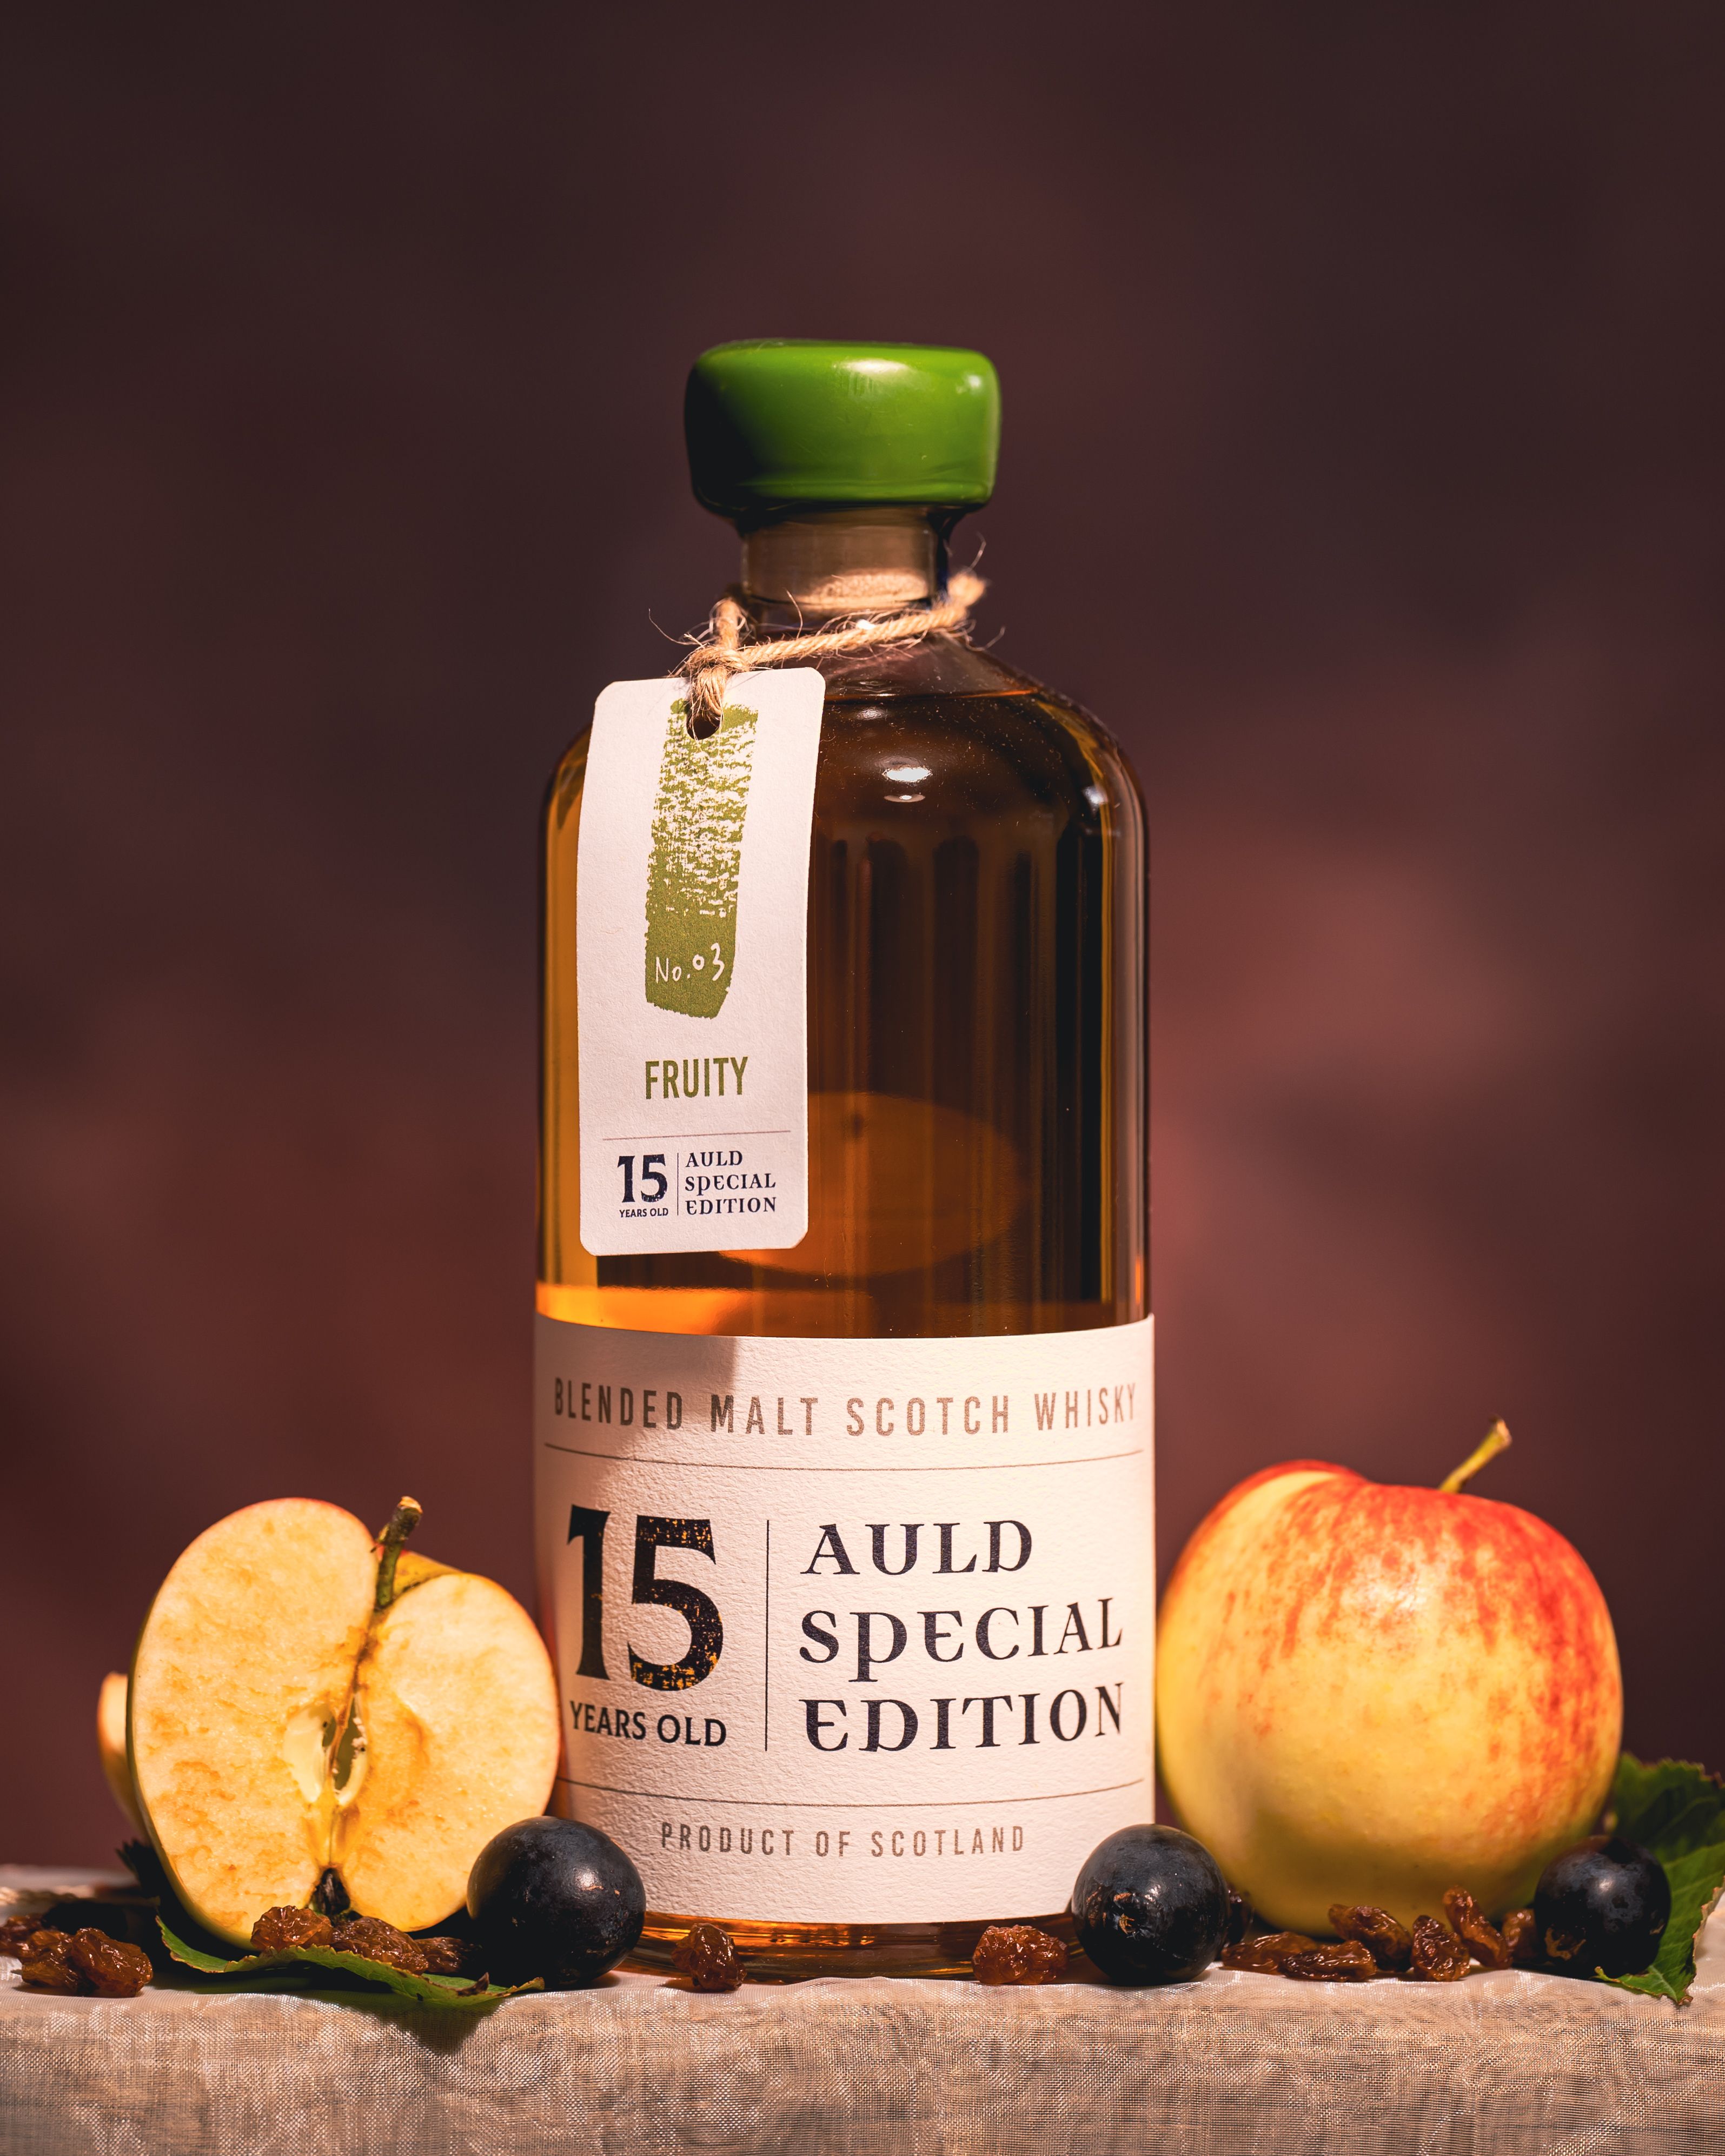 Auld Special Edition Fruity 15 Year Old Blended Malt Scotch